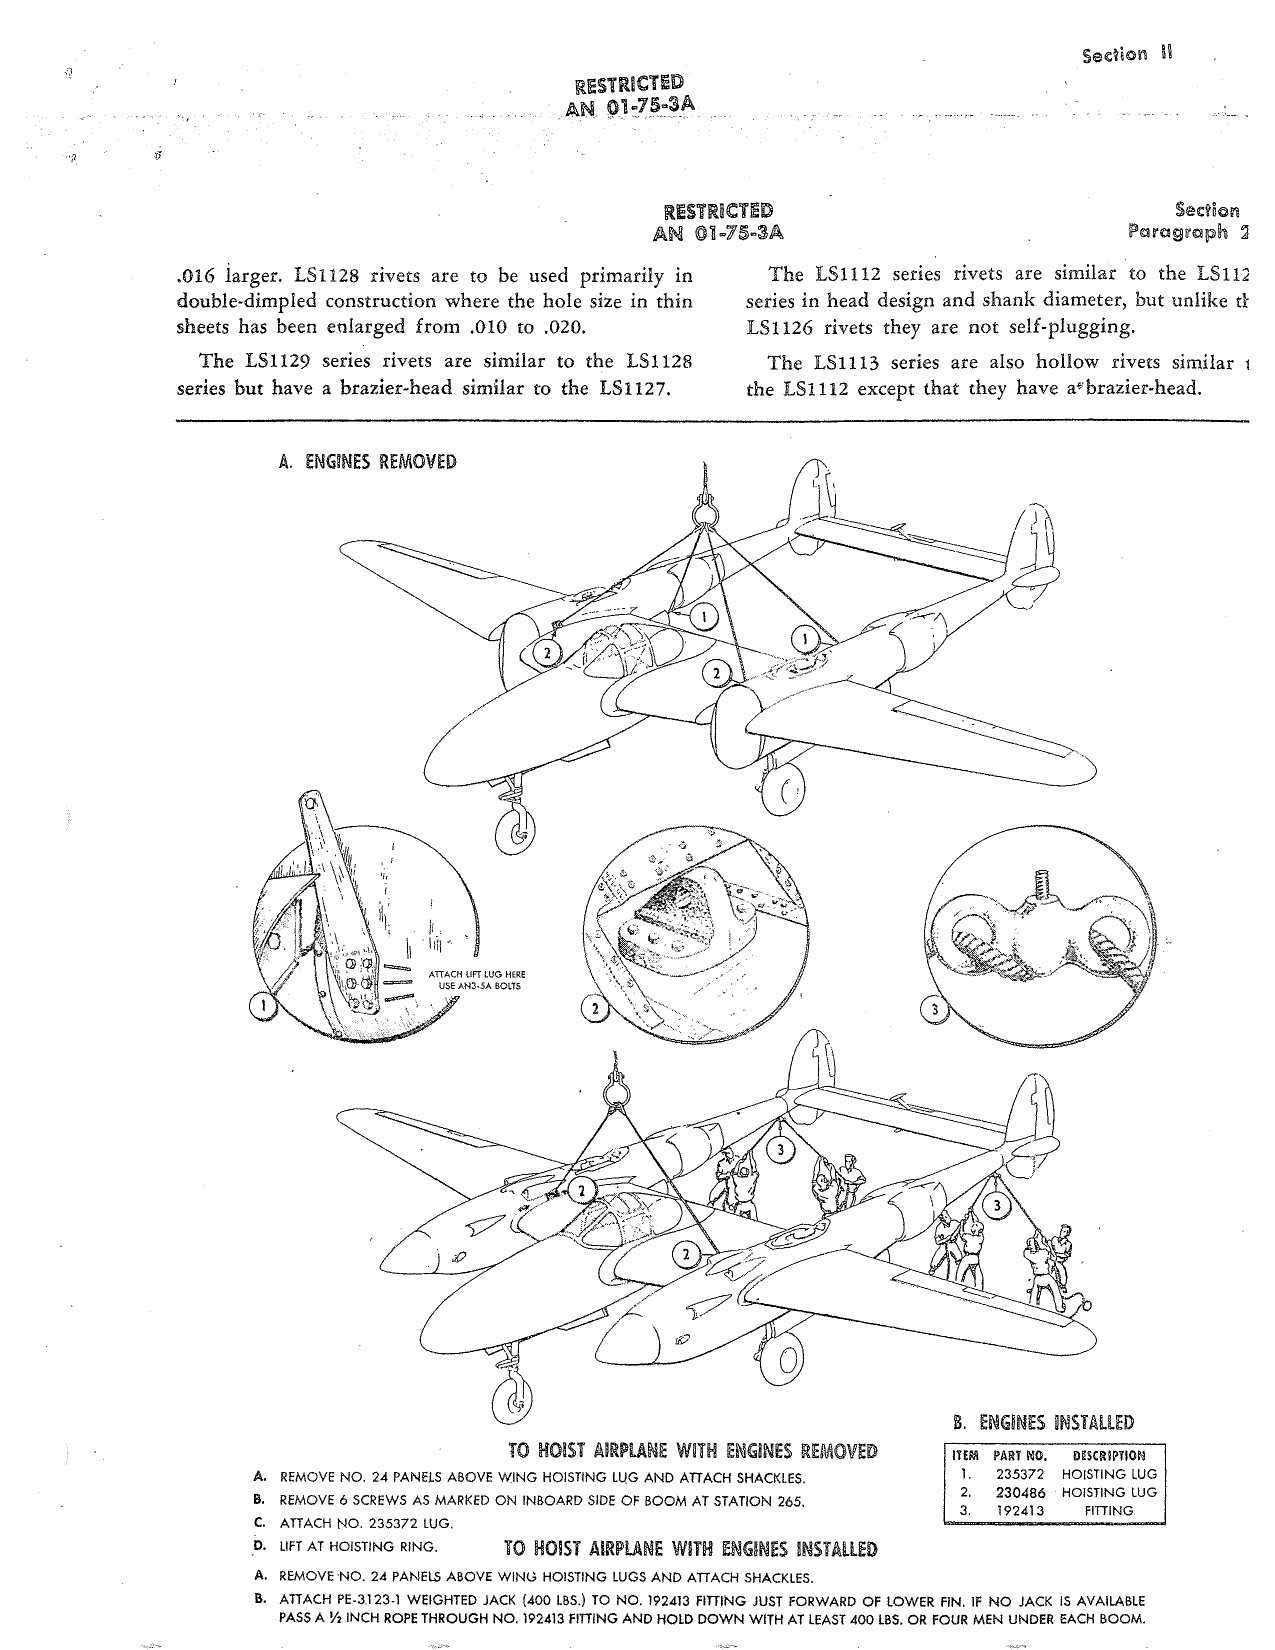 Sample page 25 from AirCorps Library document: Structural Repair Instructions - P-38